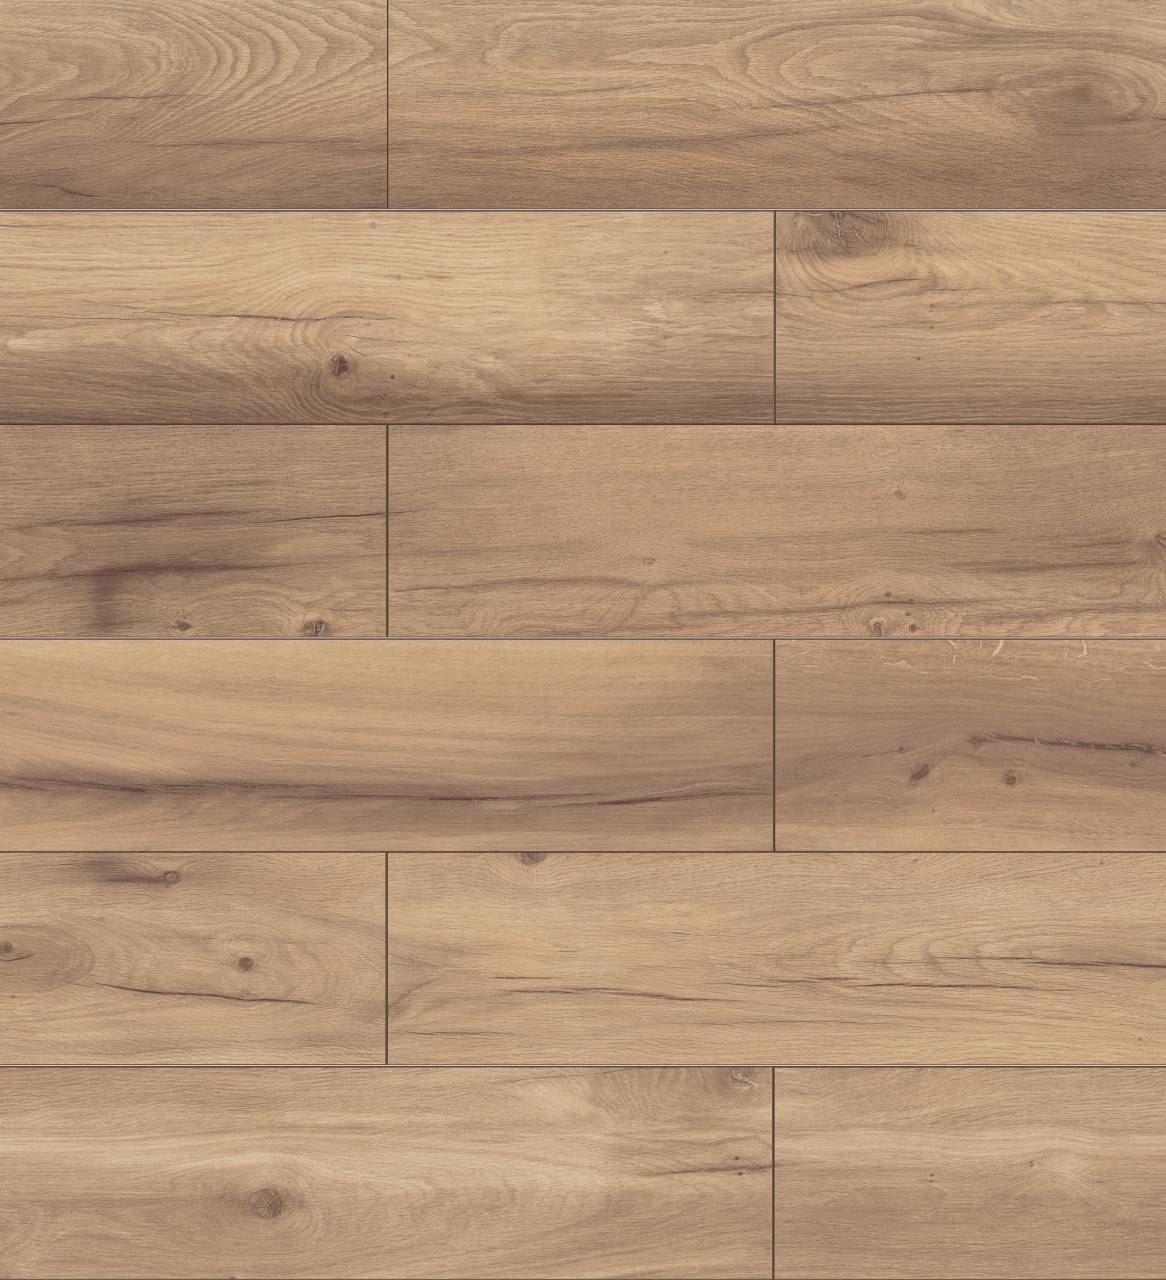 Close-up view of product 1538 Toronto Oak, emphasizing its authentic oak grain pattern and deep, natural color tones.